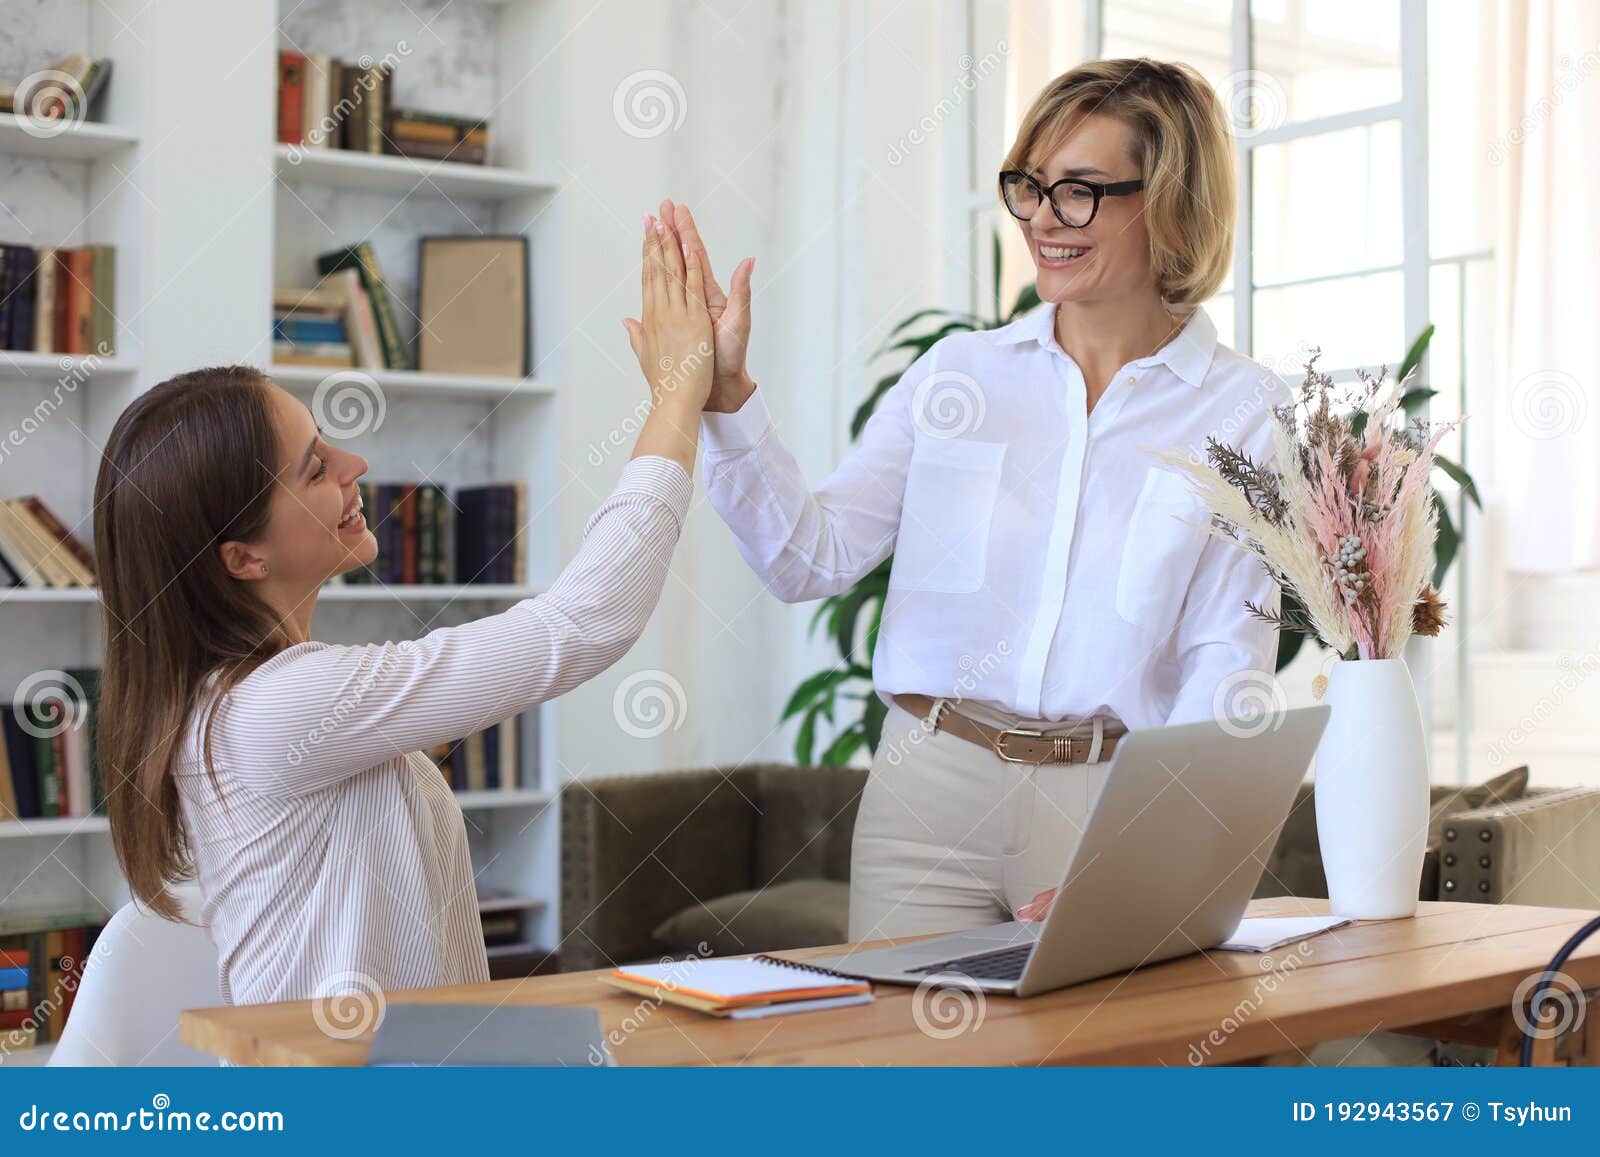 middle aged businesswoman giving high five to her young female collegue